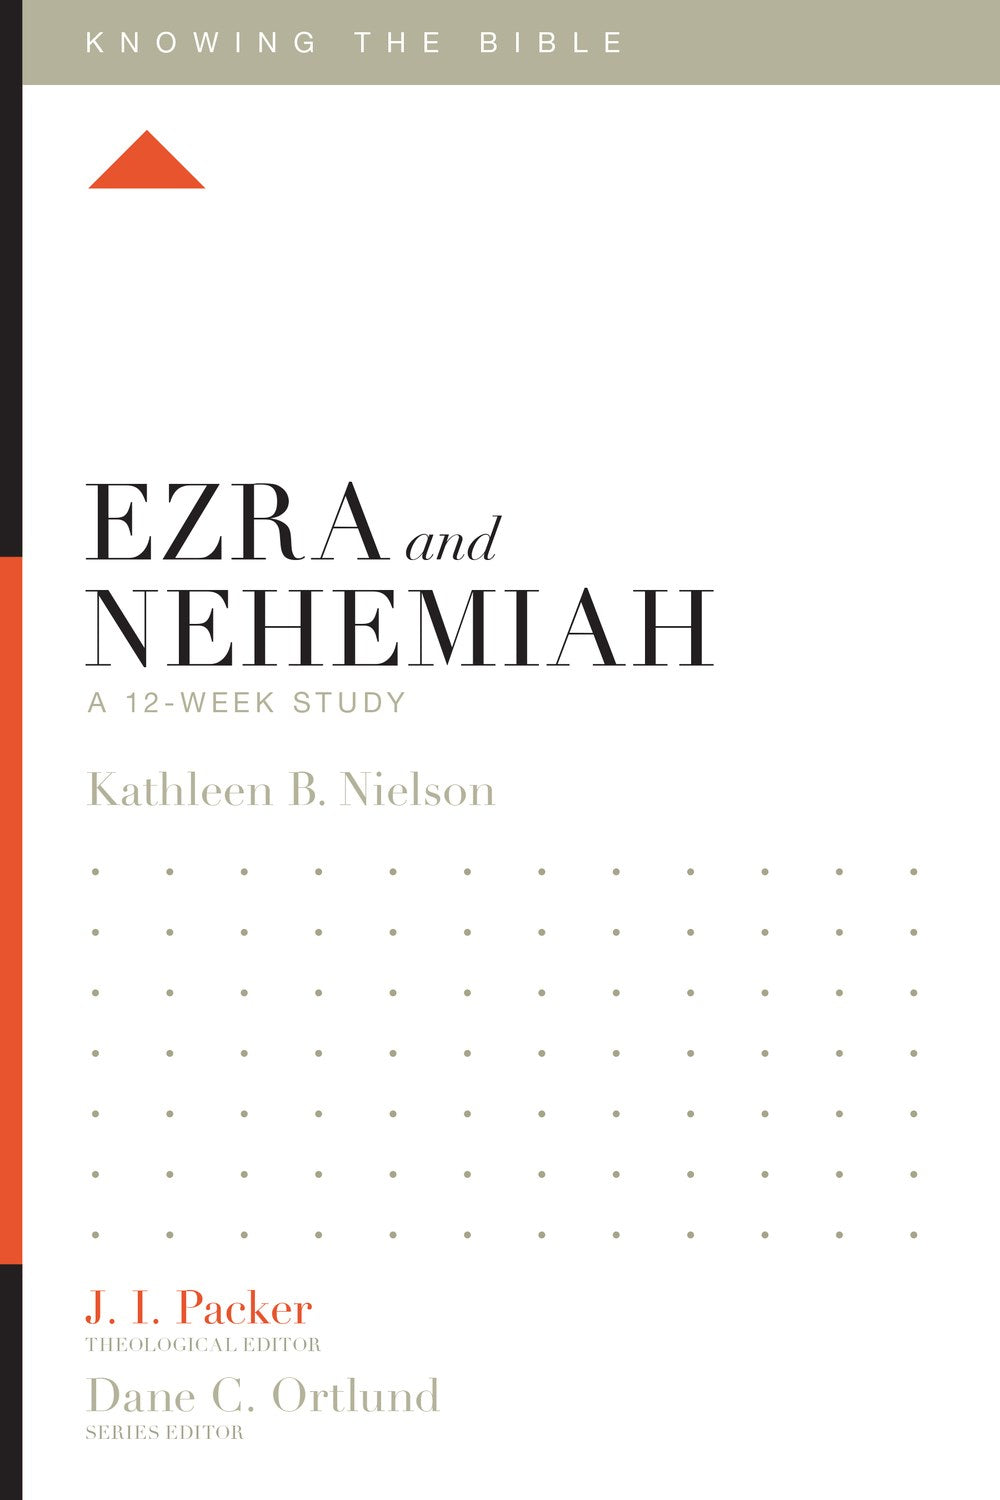 Ezra And Nehemiah: A 12-Week Study (Knowing The Bible)